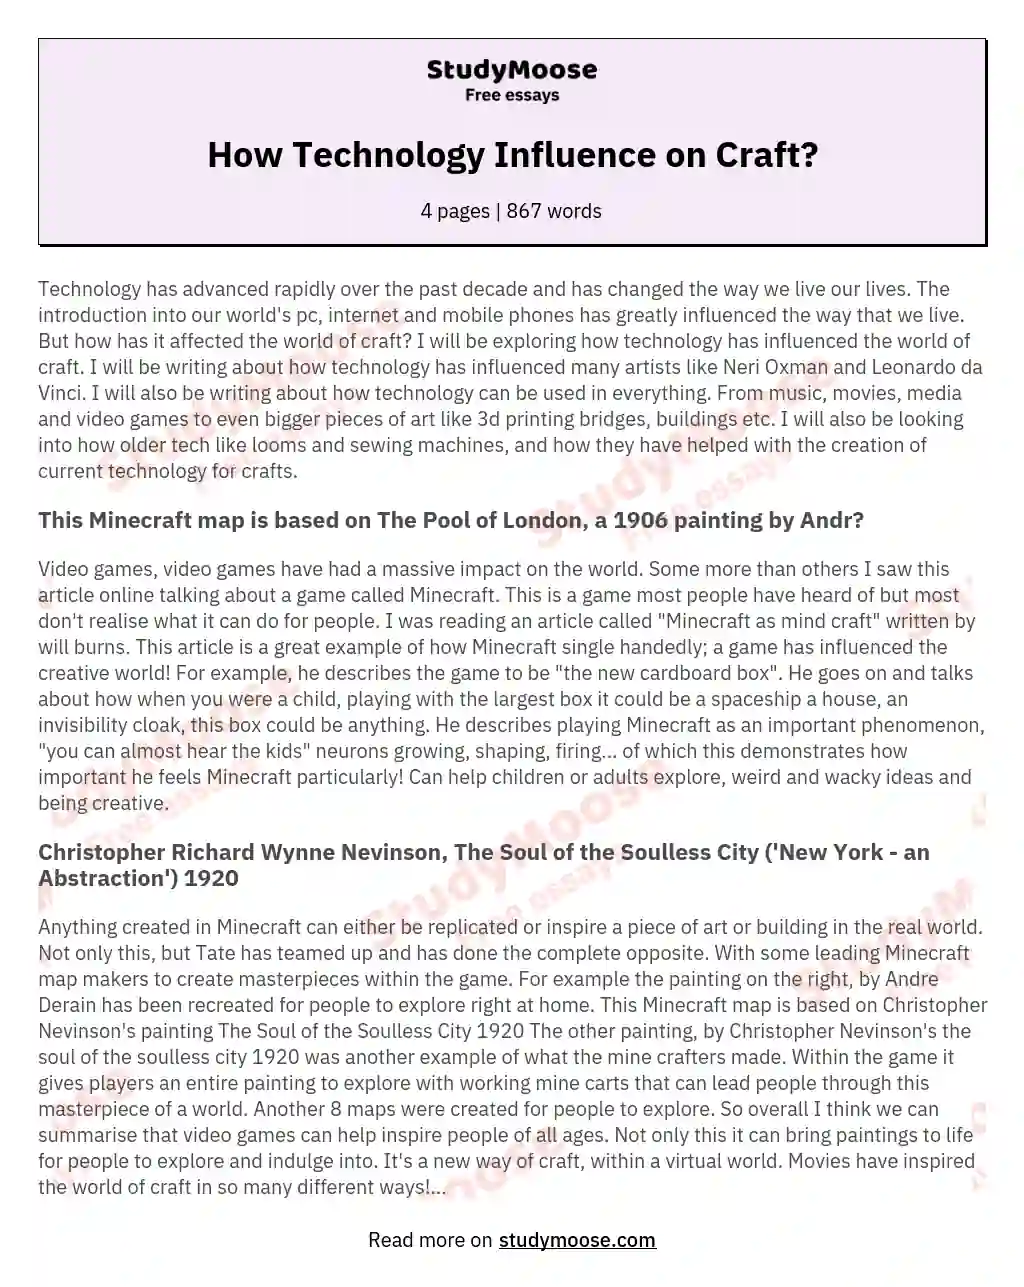 How Technology Influence on Craft? essay